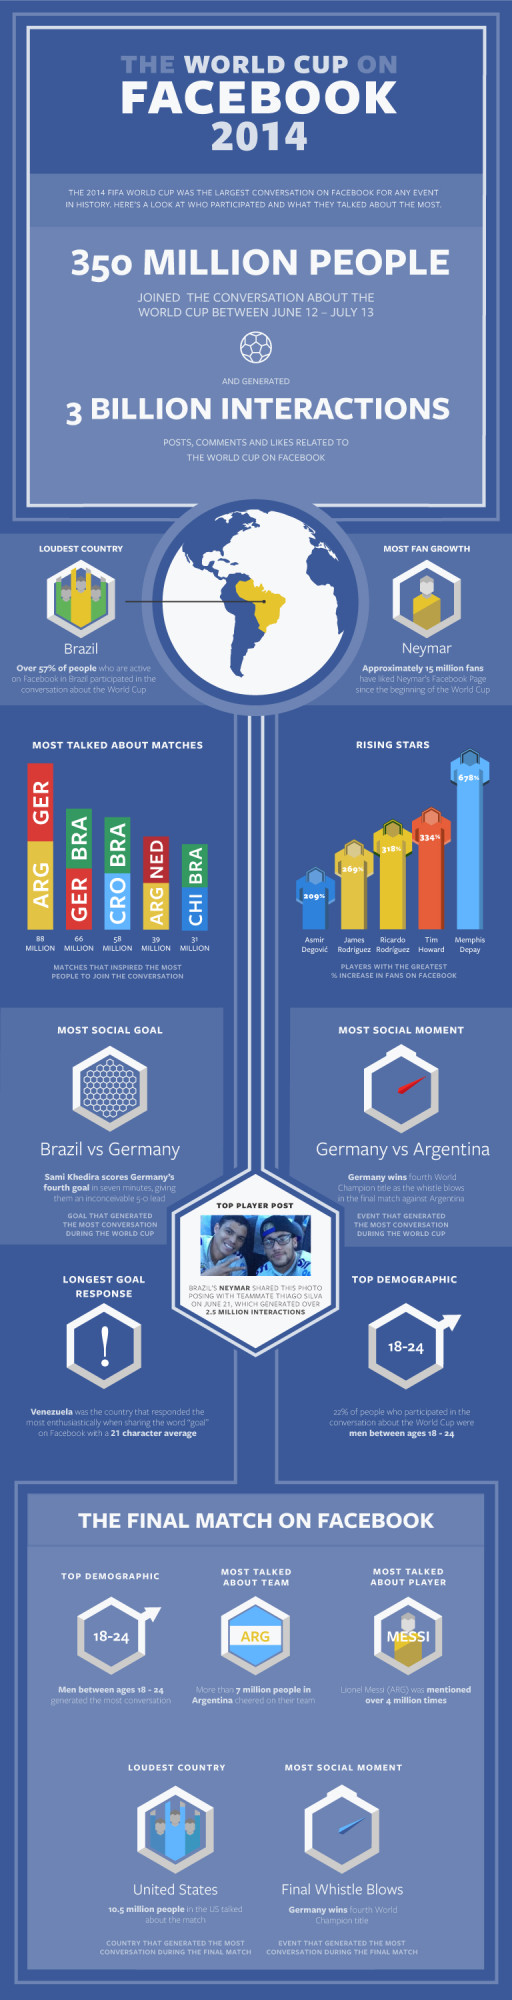 Facebook_World_Cup_Infographic-20014